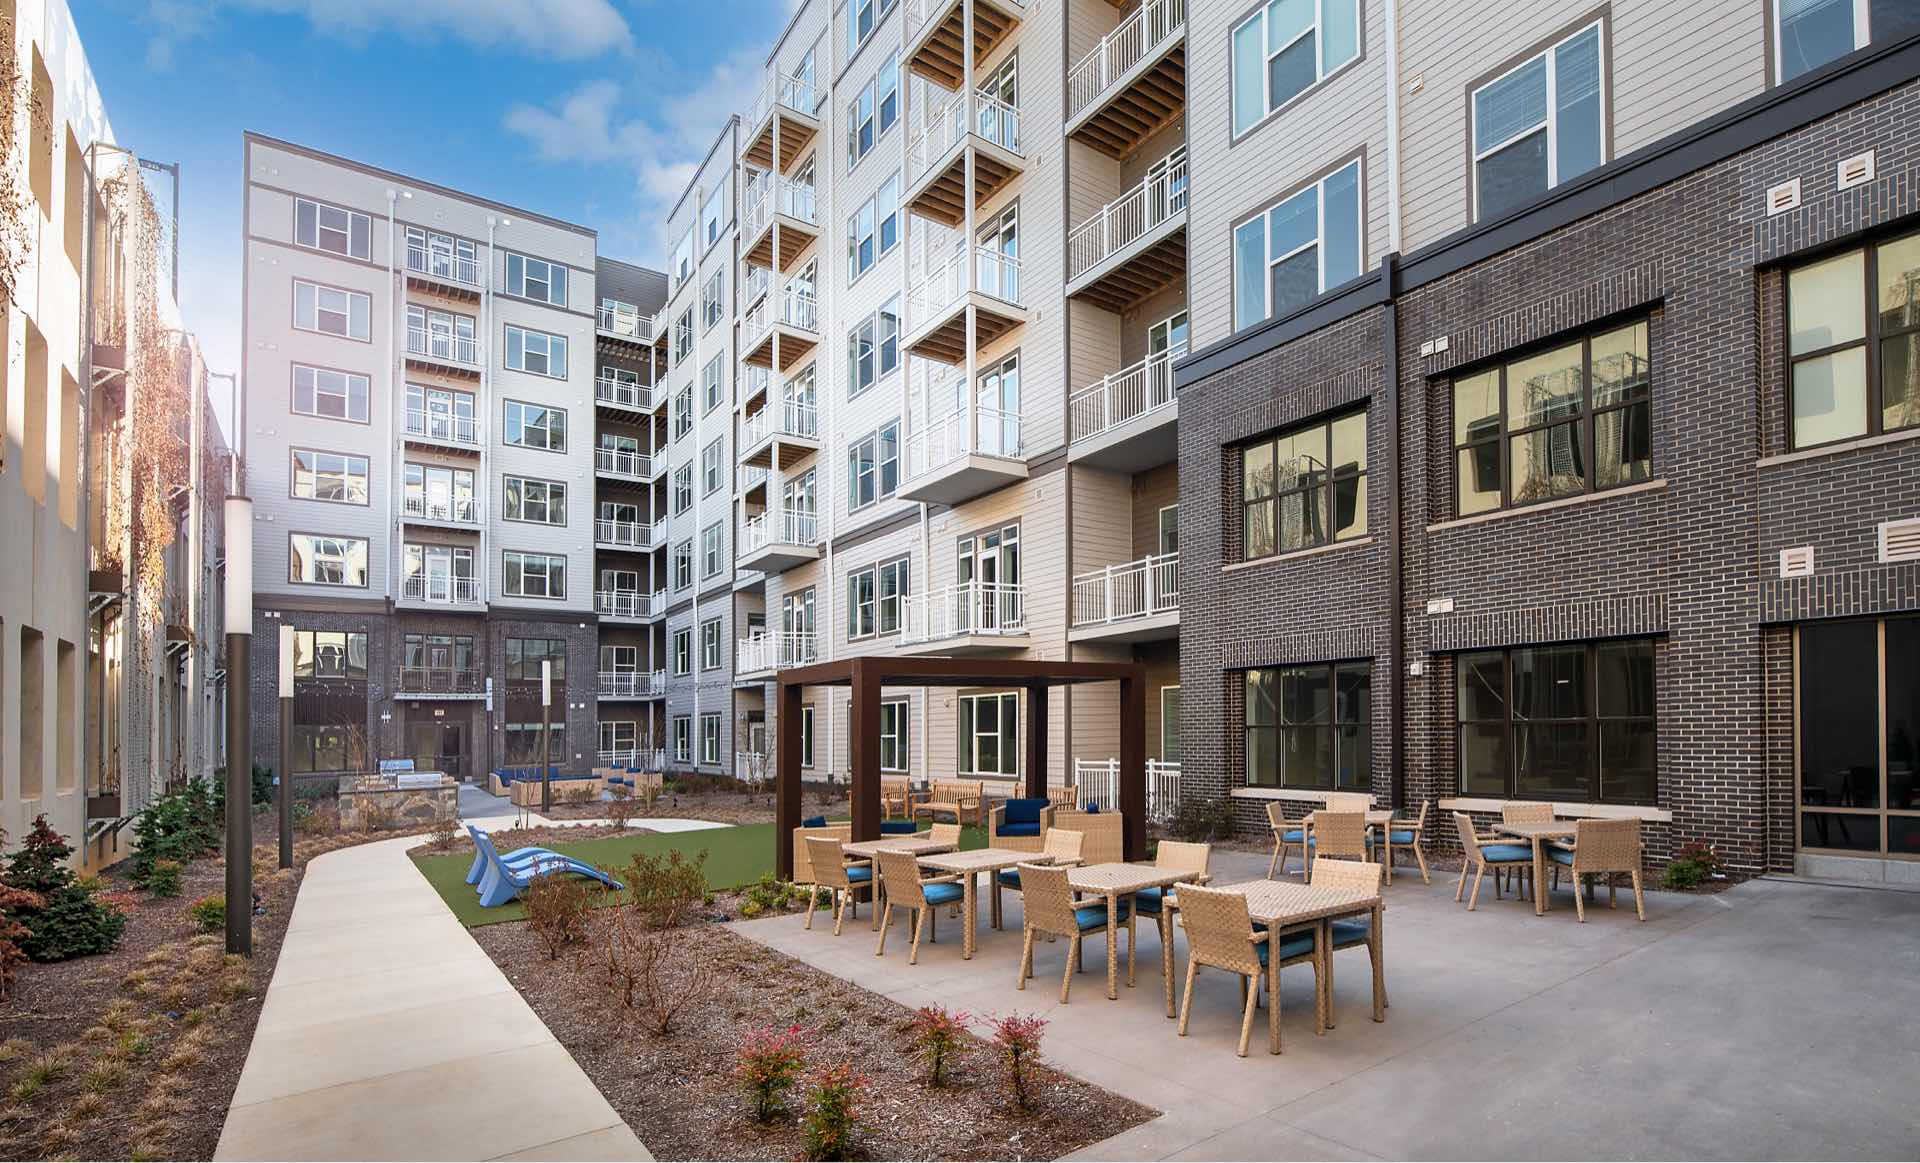 Faraday Park East outdoor courtyard with grills, cabana, and lounge chairs